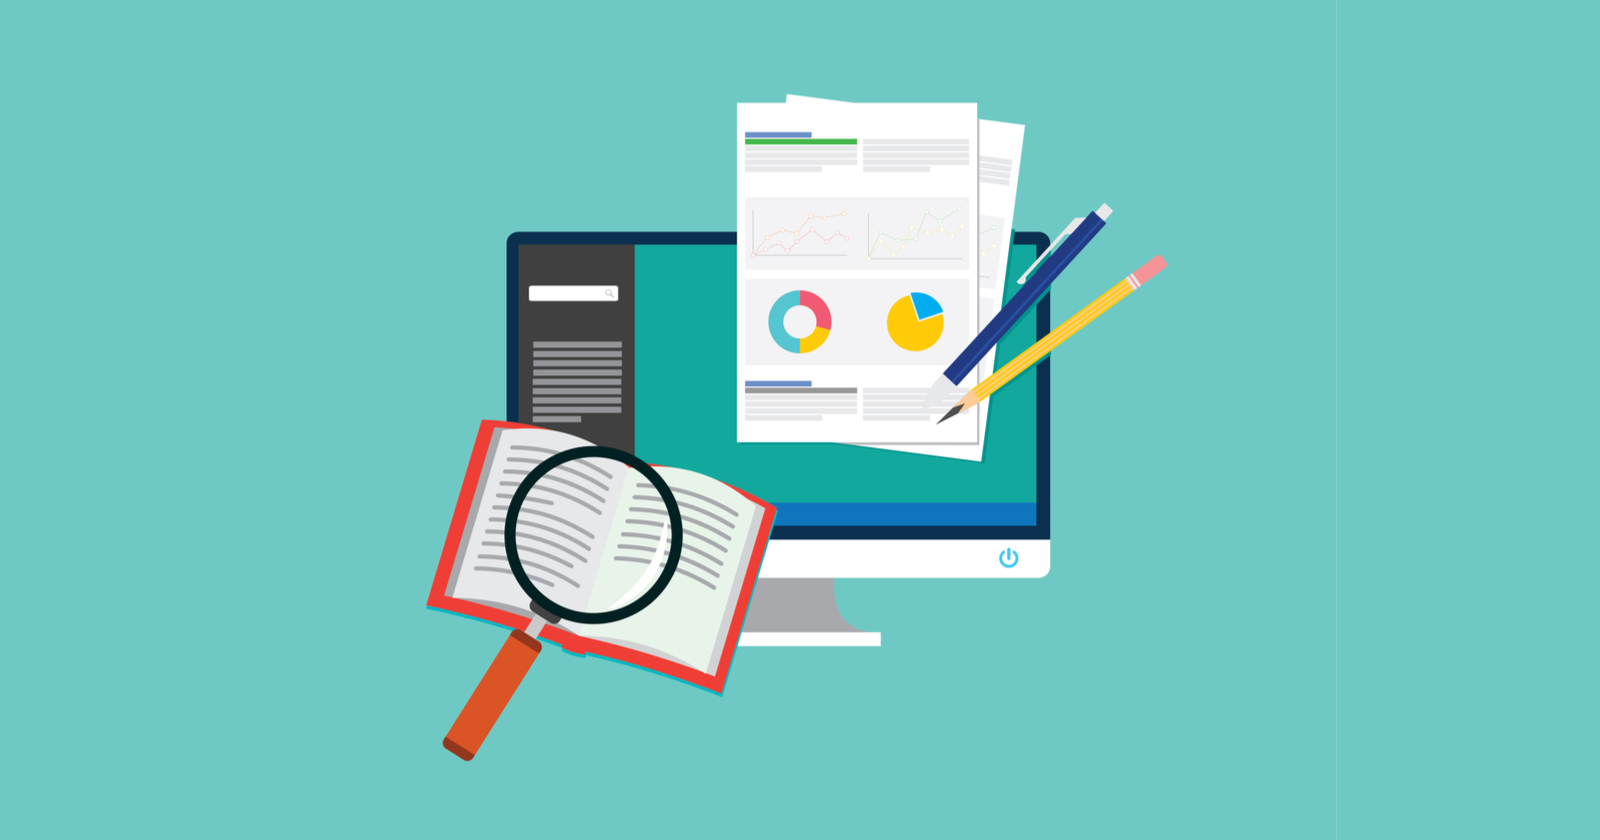 How to Write a Killer Case Study That Converts Clients